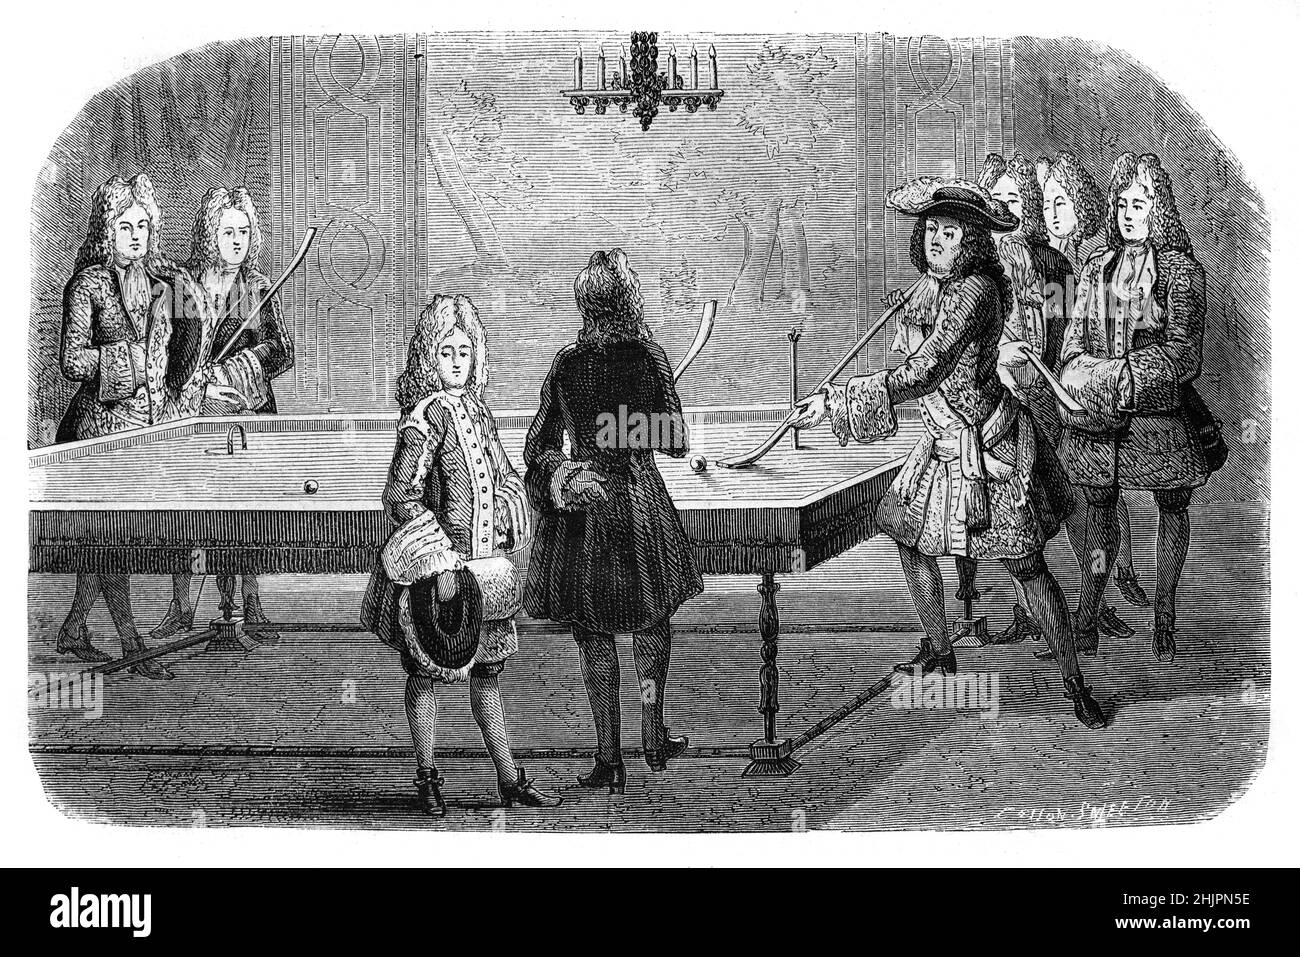 French King Louis XIV Playing French Billiards aka Carom Billiards or Carambole Billiards with his Minister Michel Chamillart or Chamillard in the Palace of Versailles. One of a series of six engravings 'Appartements de Versailles' by Antoine Trouvain published between 1694 and 1698. This engraving shows the third apartment in the series. Stock Photo